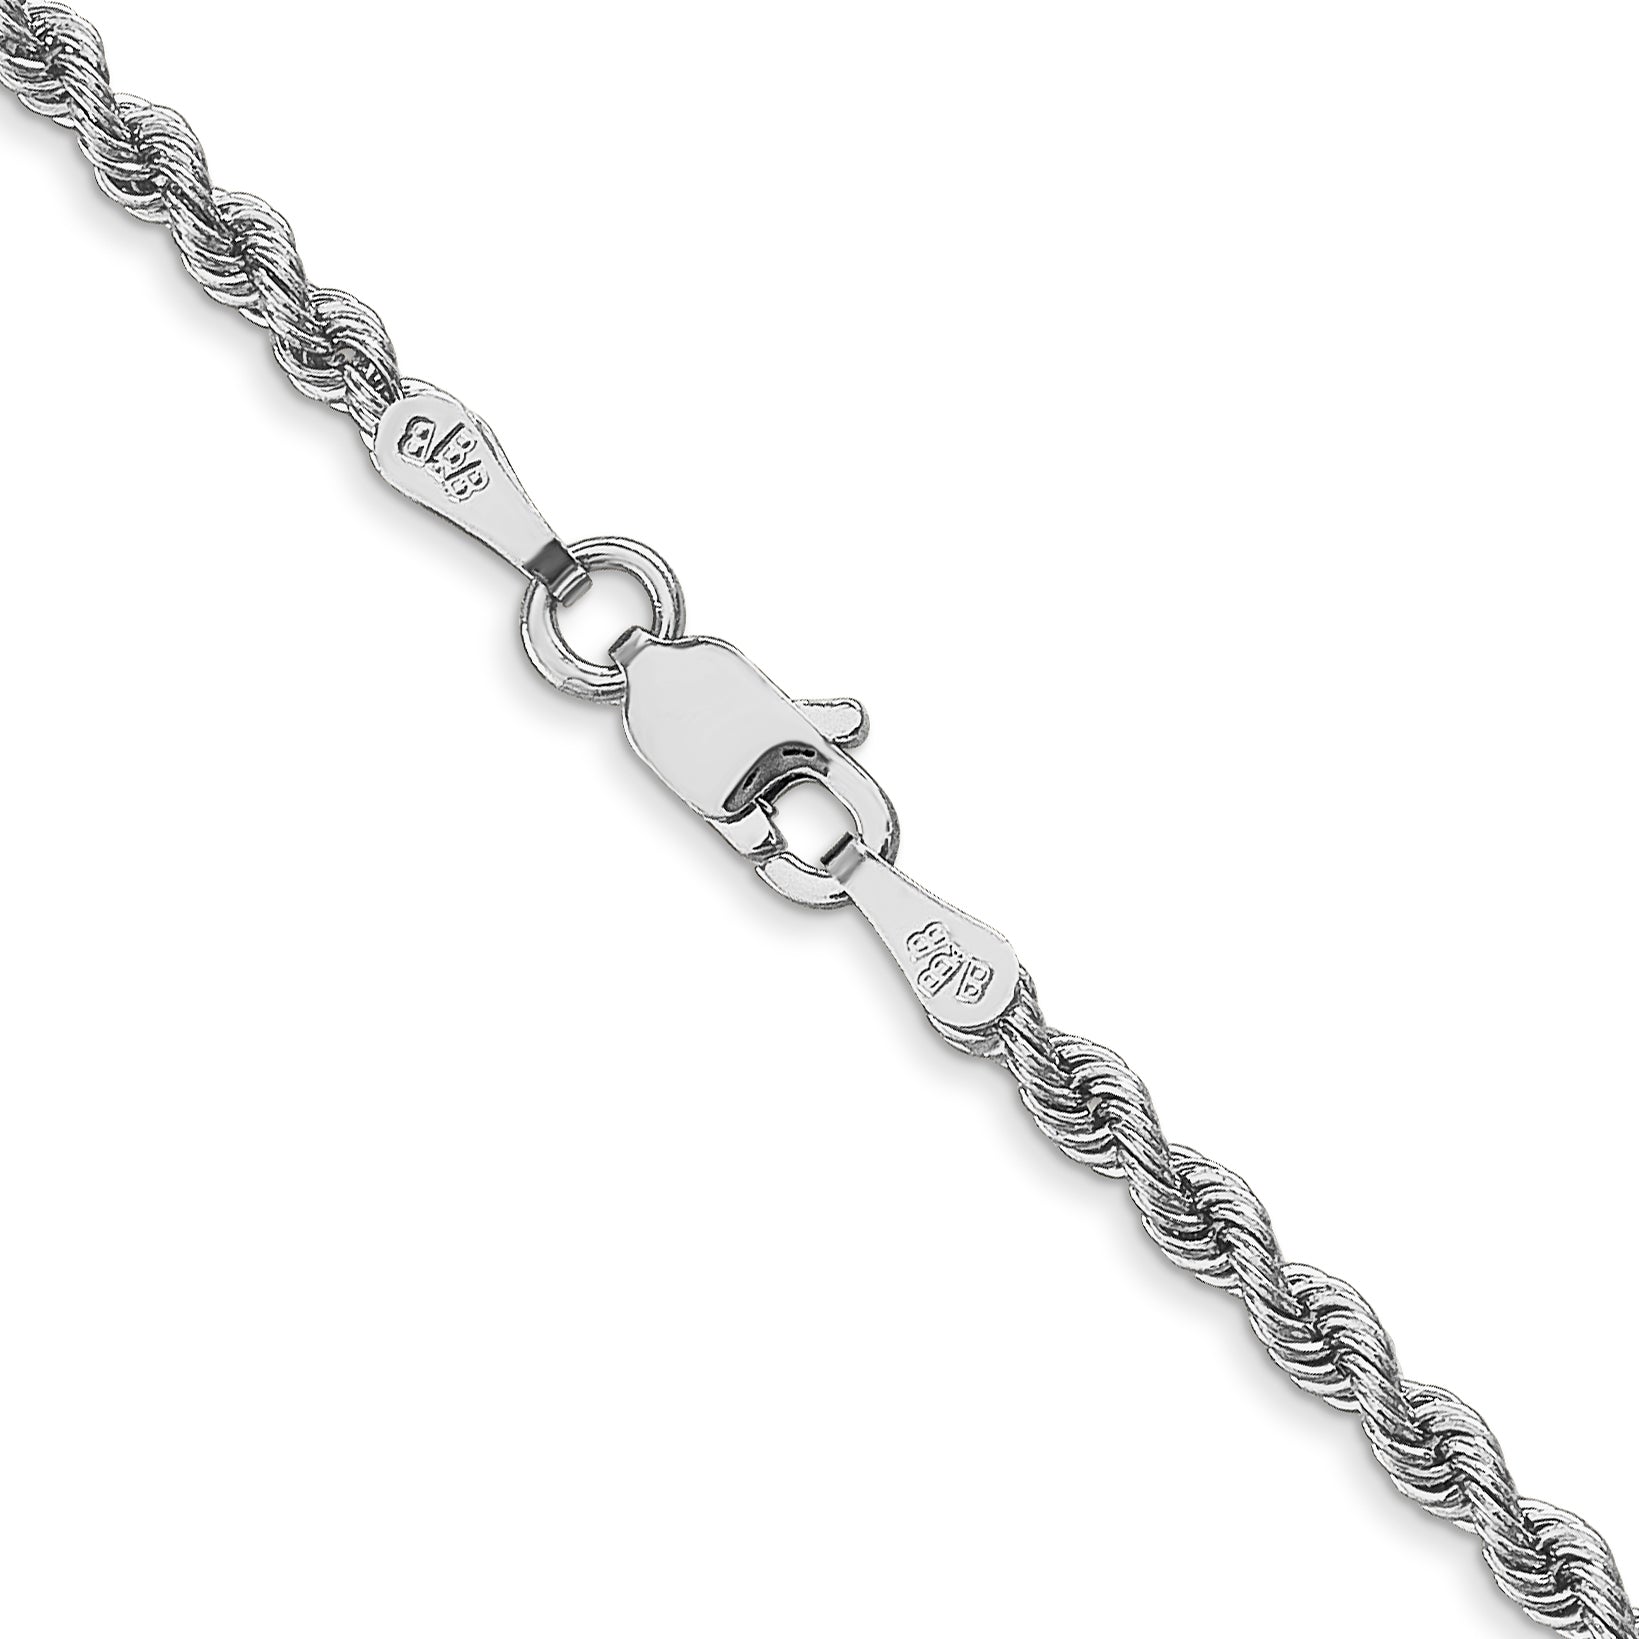 14K White Gold 16 inch 2.5mm Regular Rope with Lobster Clasp Chain